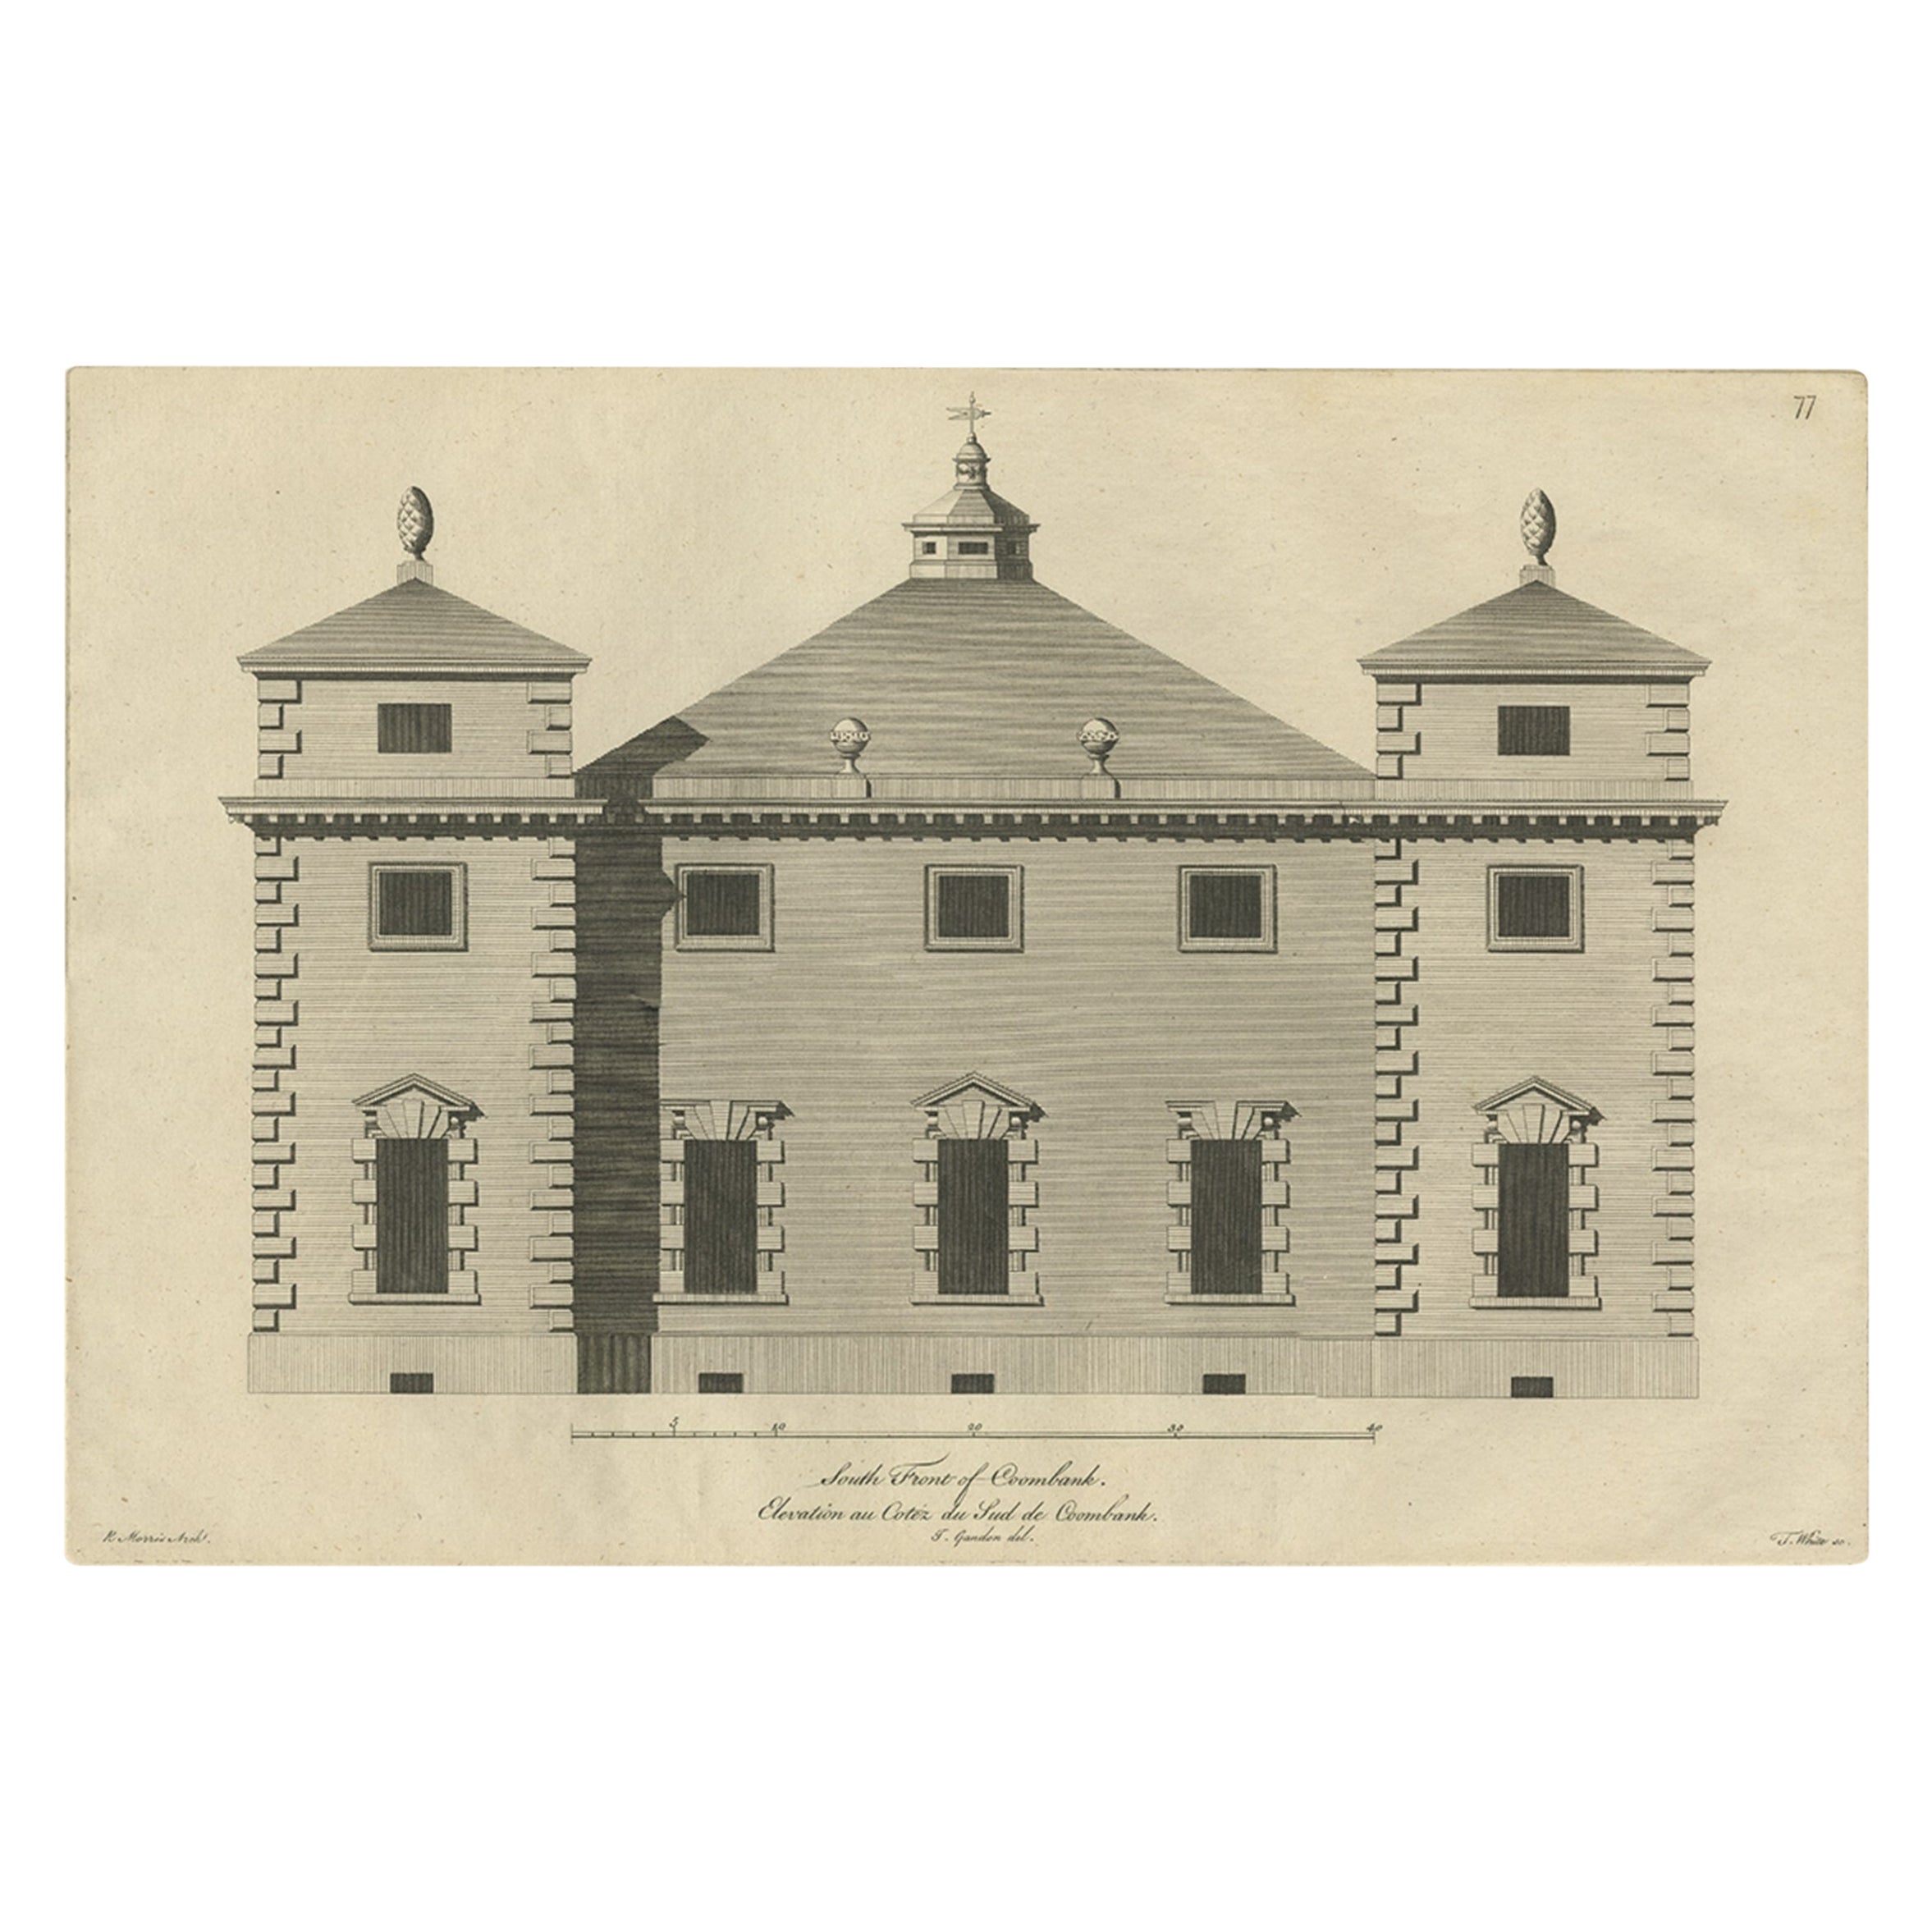 Antique Print of the Southern Facade of Coombank in Kent, England, c.1770